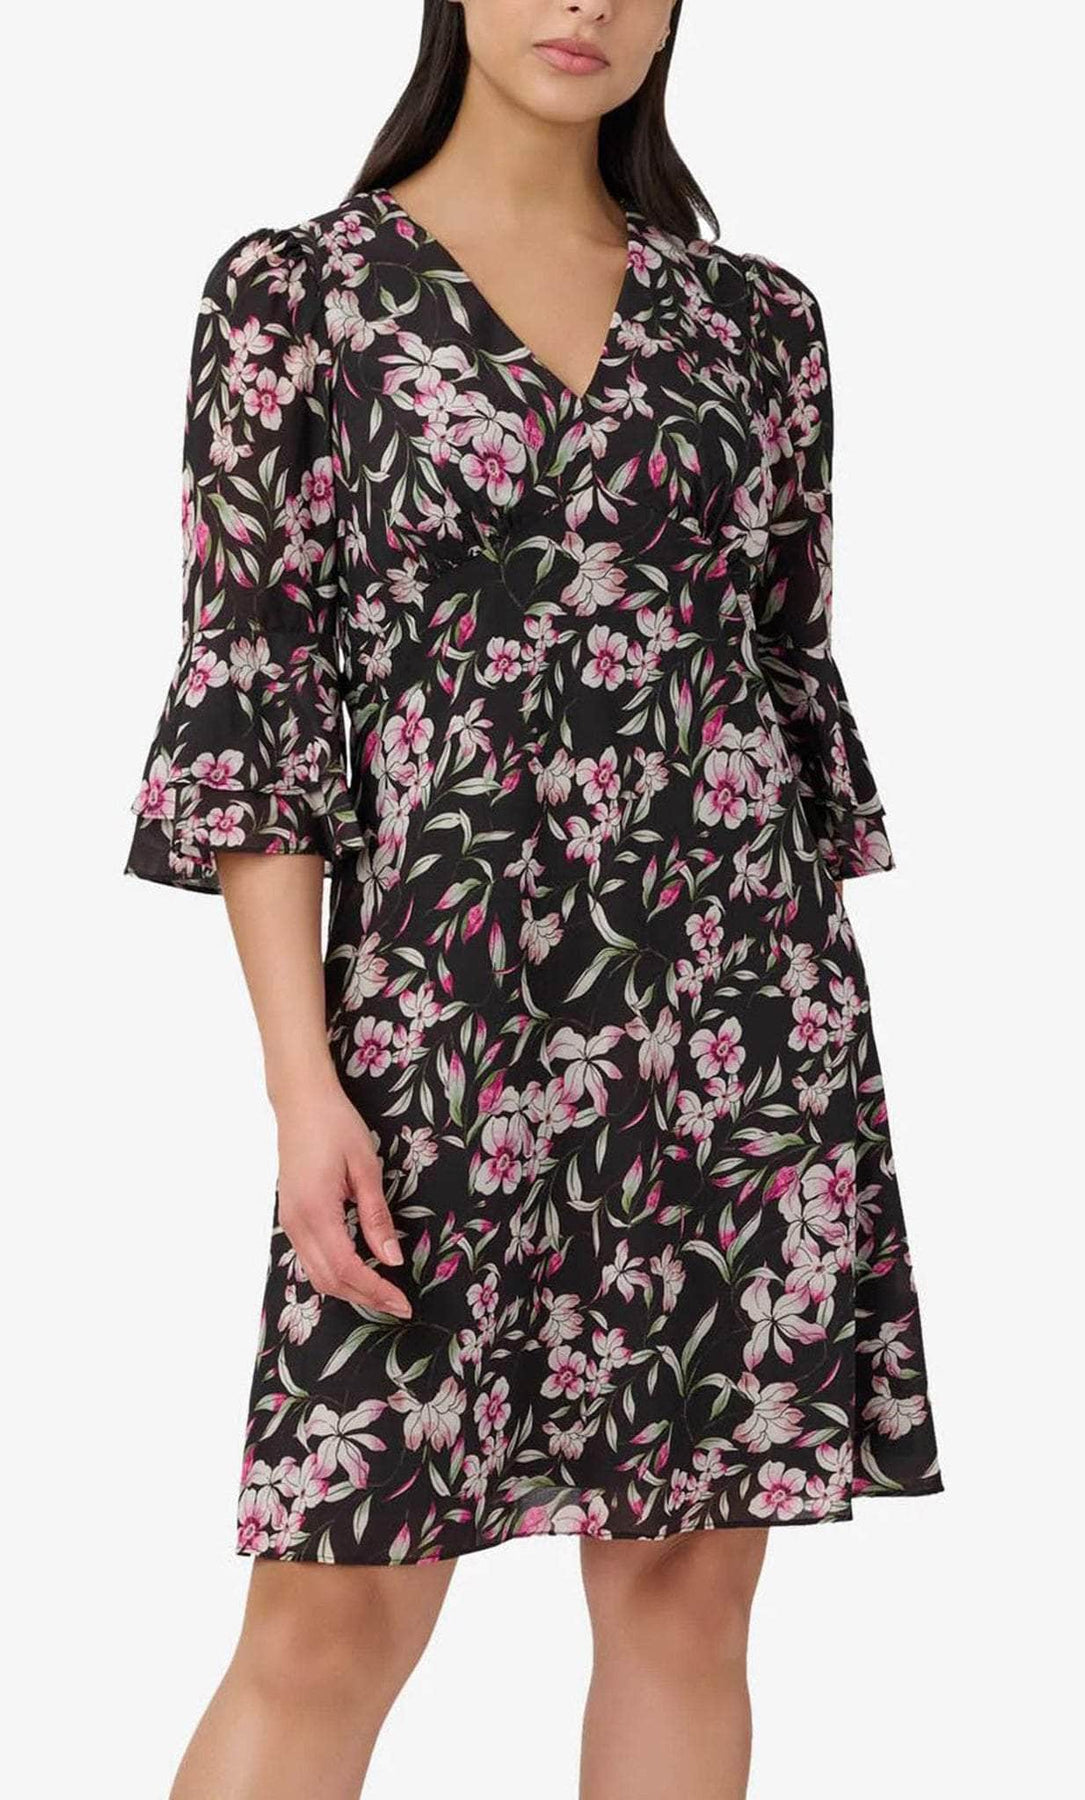 Adrianna Papell AP1D104622 - Bell Sleeve Floral Short Dress Holiday Dresses